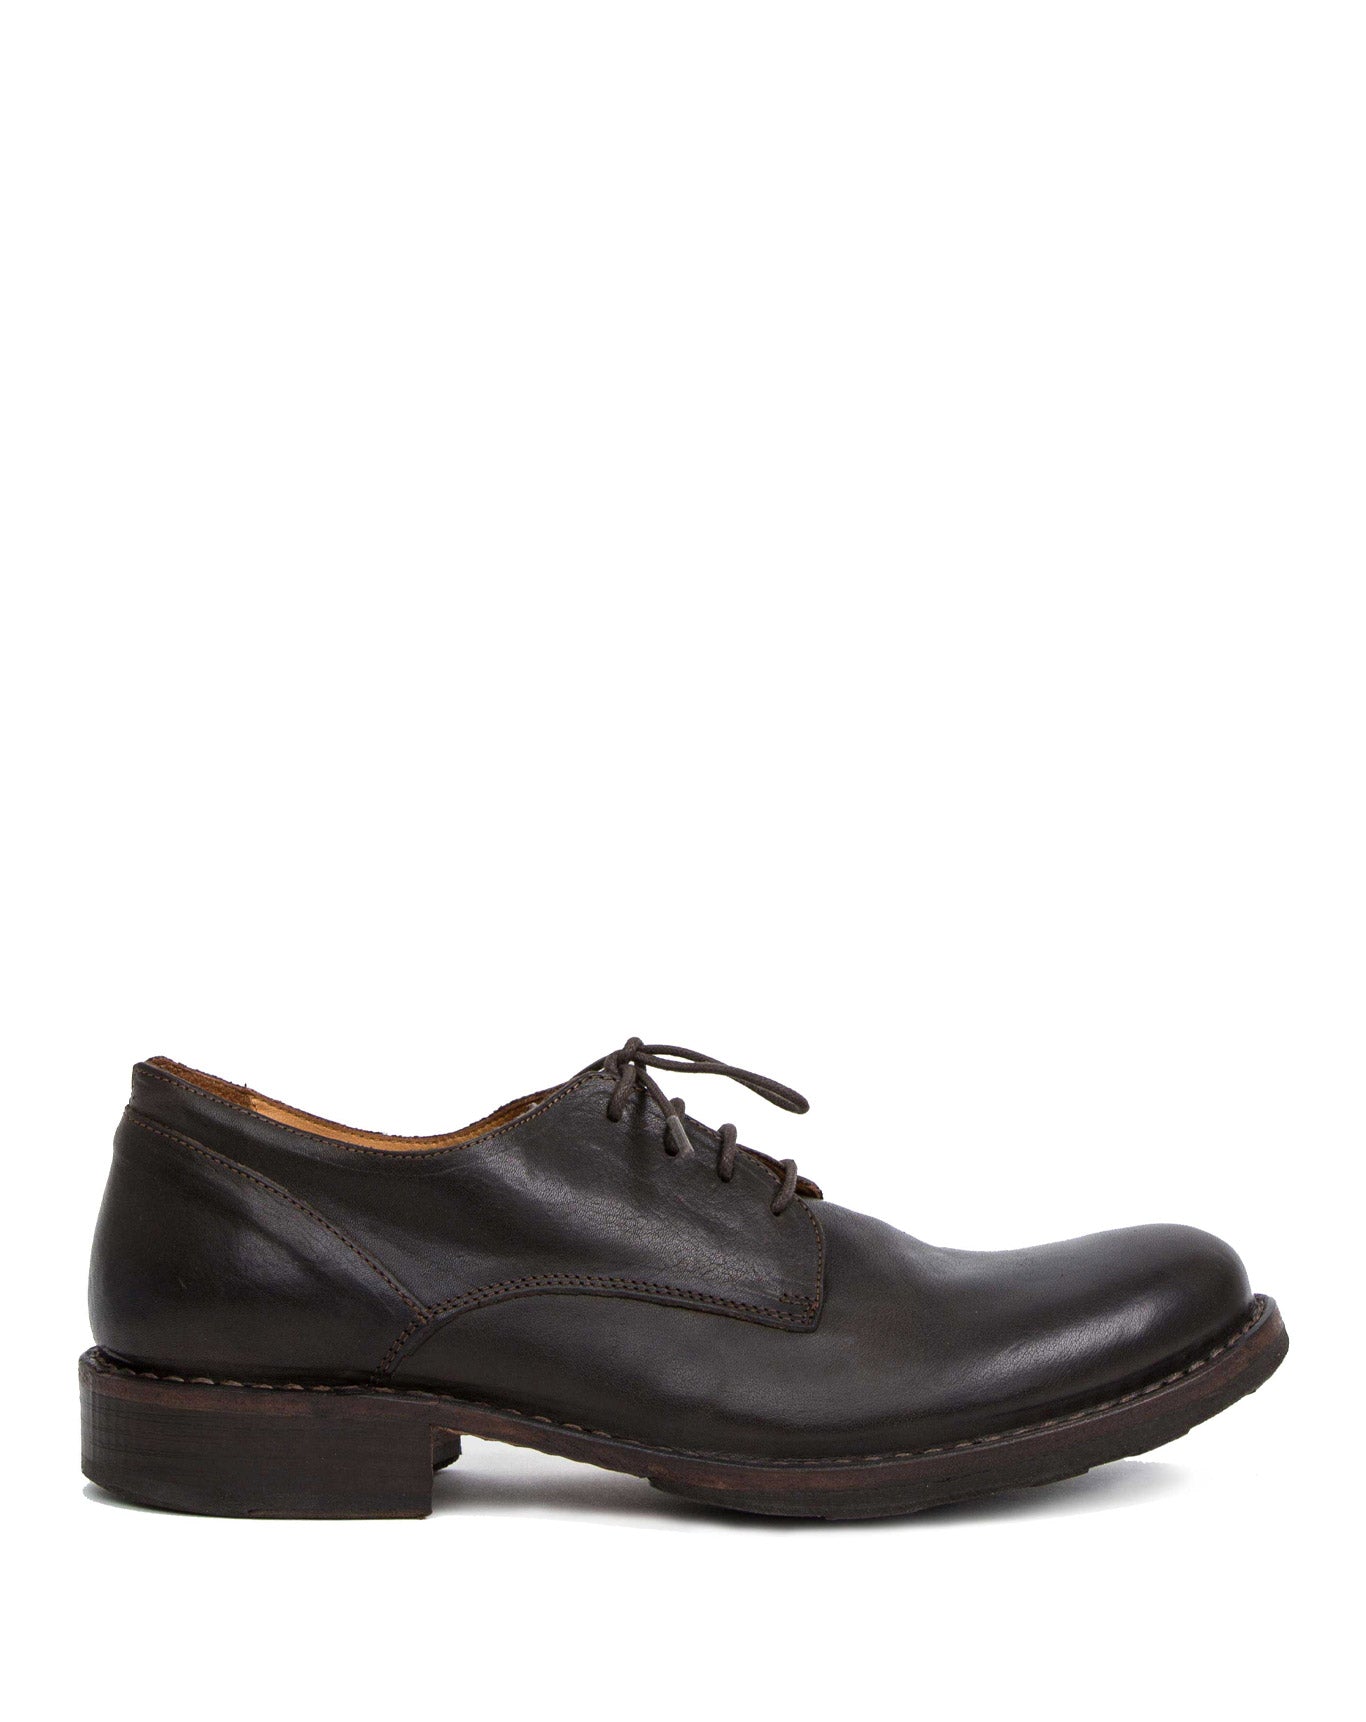 Fiorentini + Baker, ETERNITY 706-CTM, Derby shoe, long-standing favourite from the Eternity line. Handcrafted with natural leather by skilled artisans. Made in Italy. Made to last.